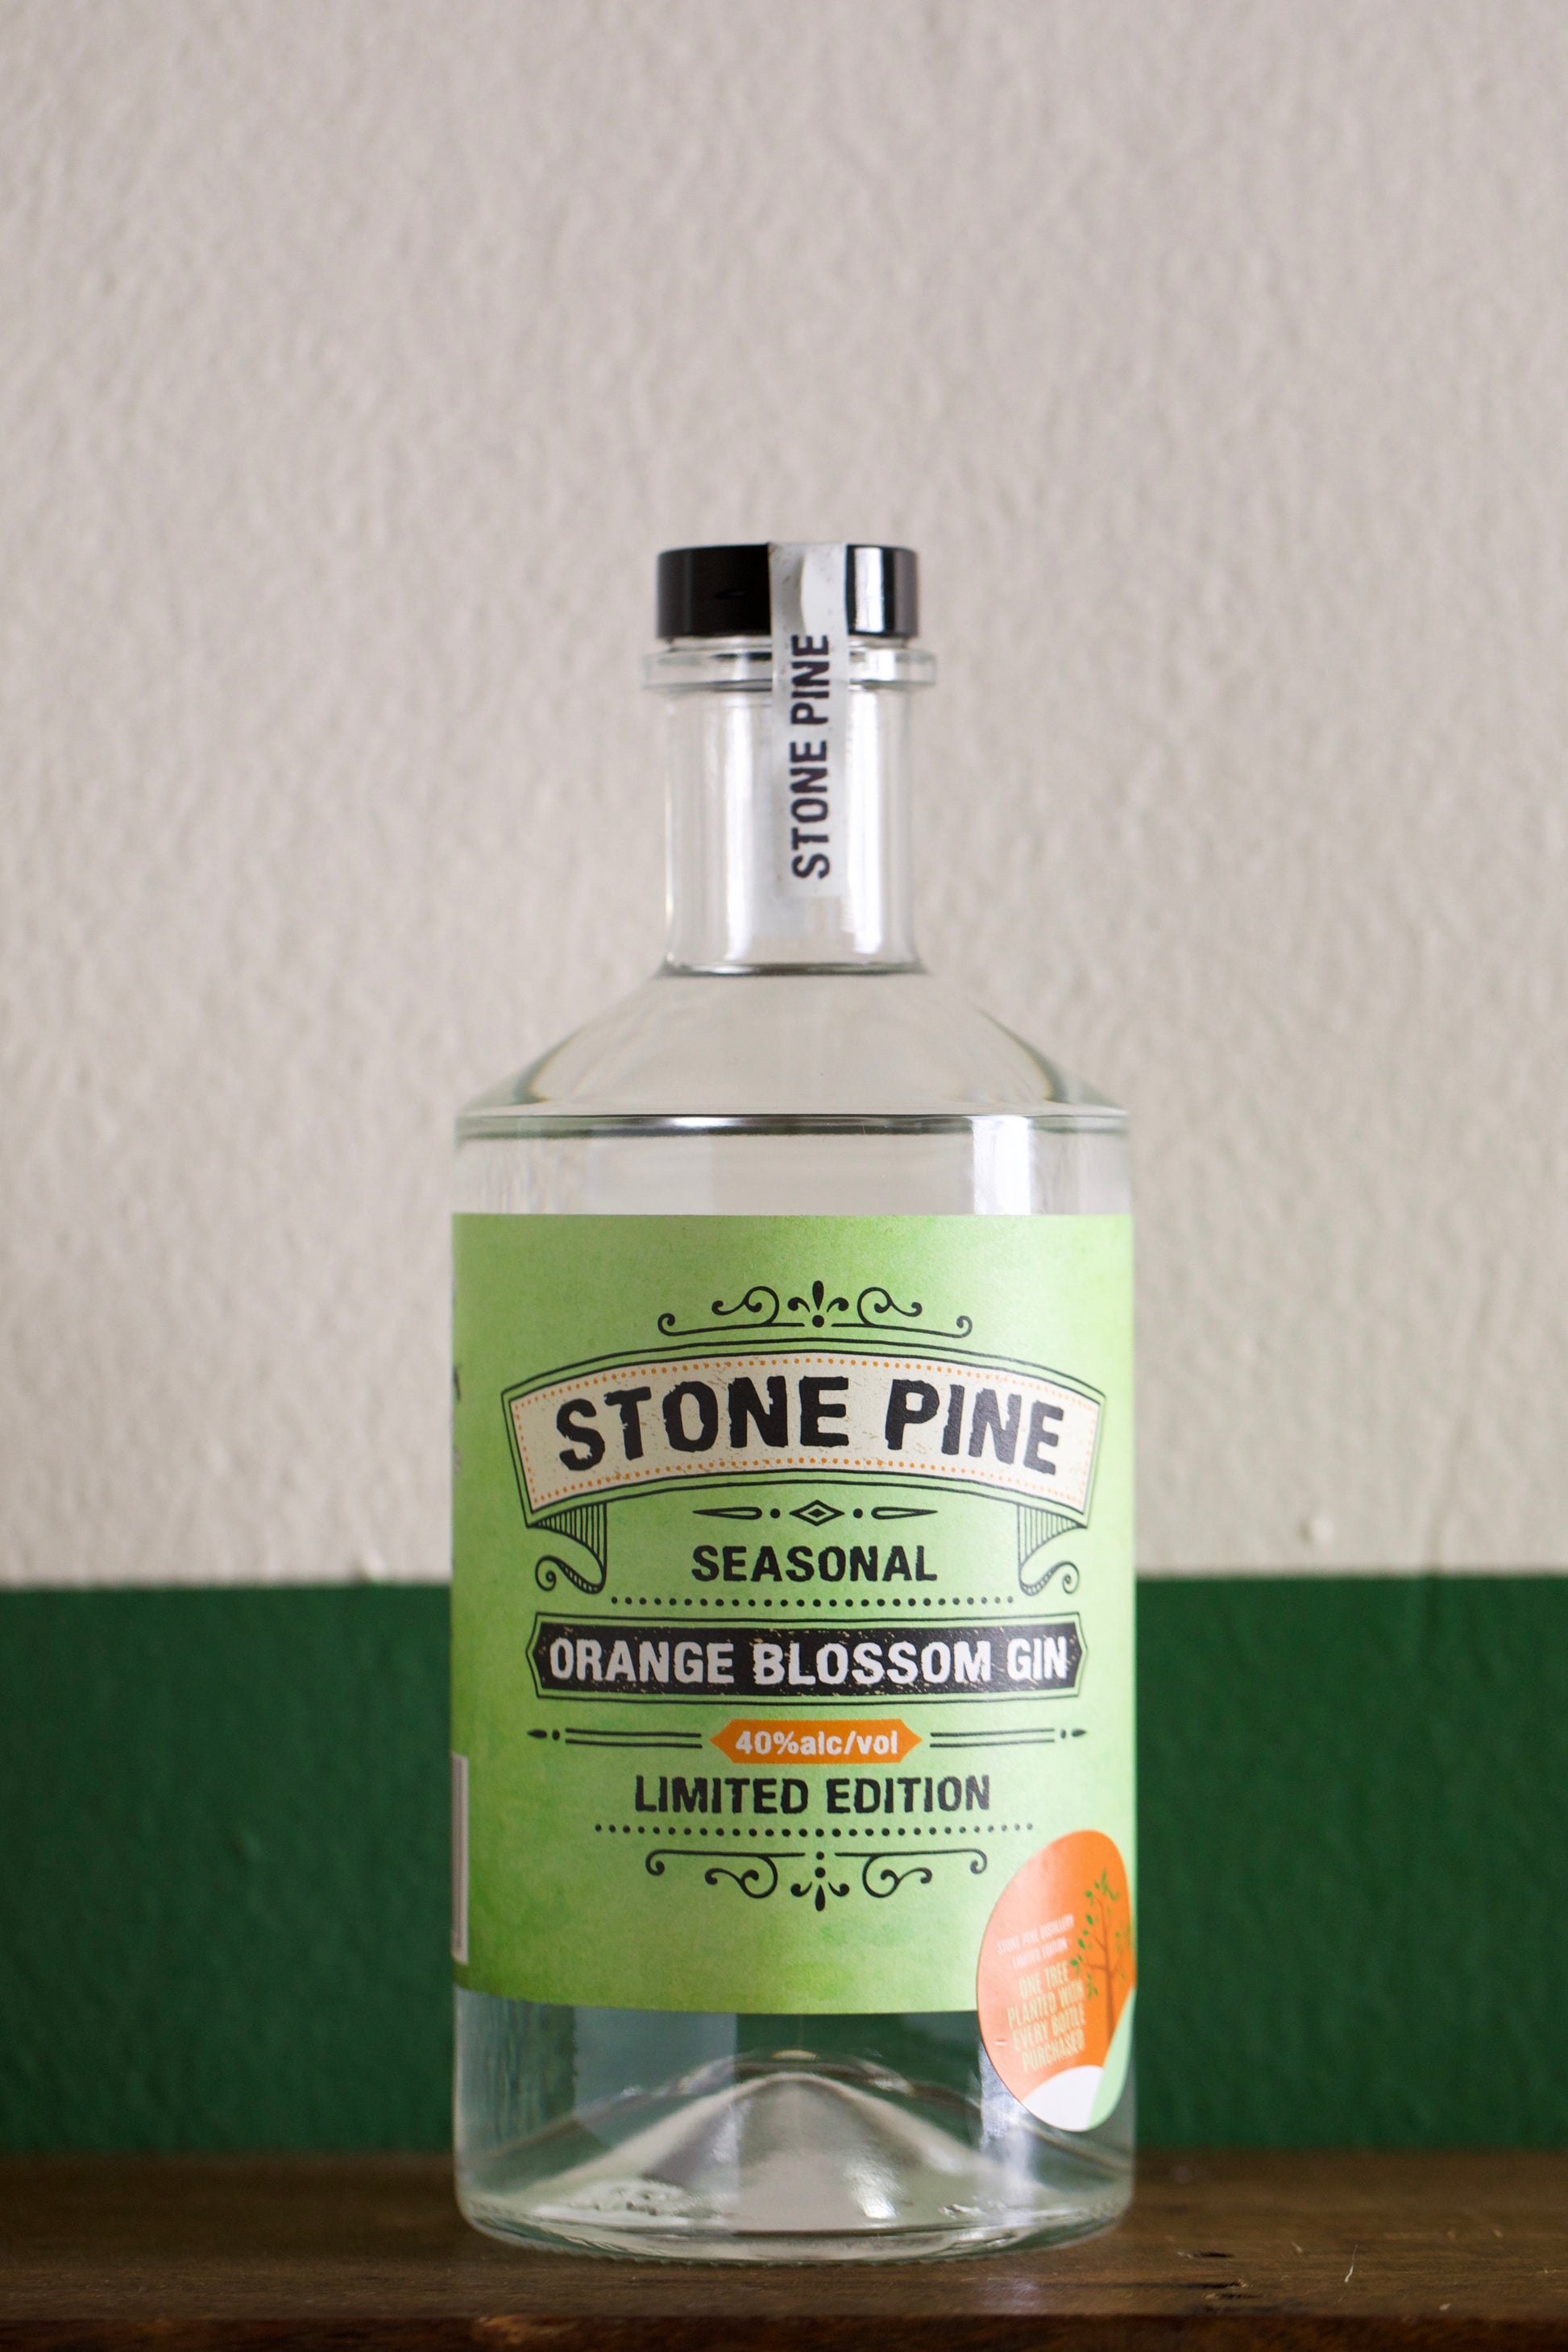 Bottle of Stone Pine Limited Edition Orange Blossom Gin 700ml